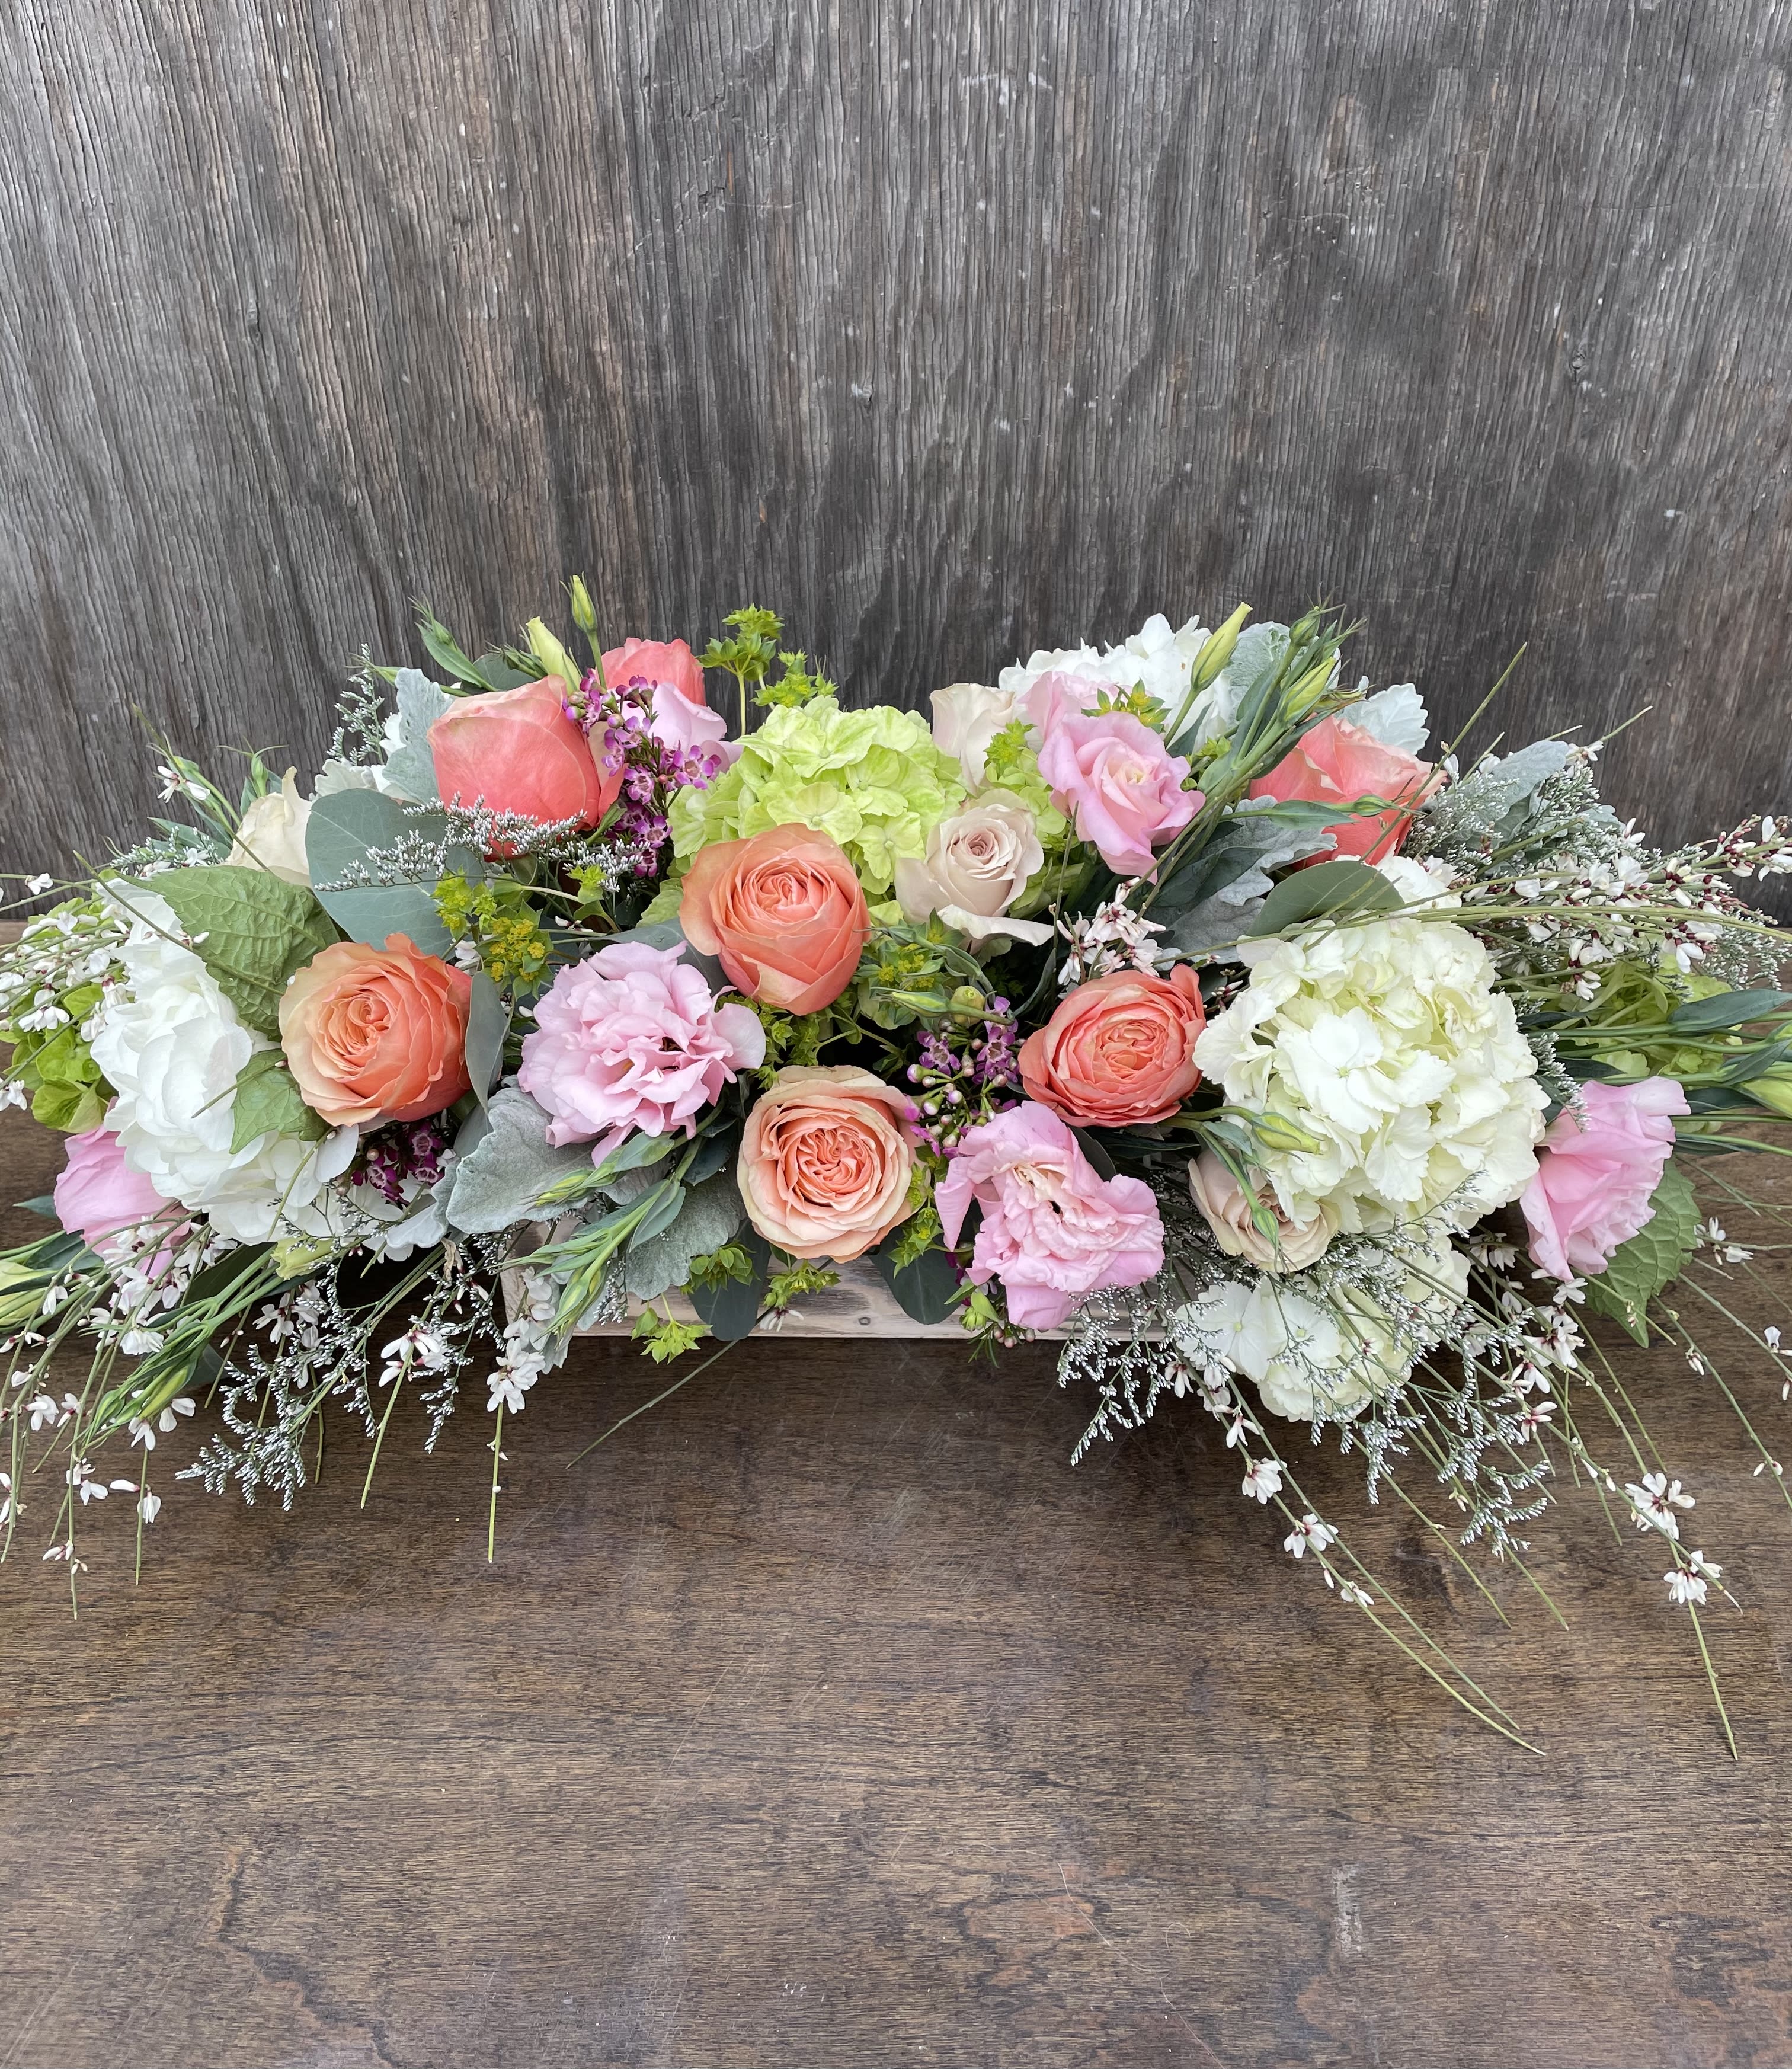 A New Day - Start someone’s morning off with this gorgeous bouquet to remind anyone that a new day has truly come.